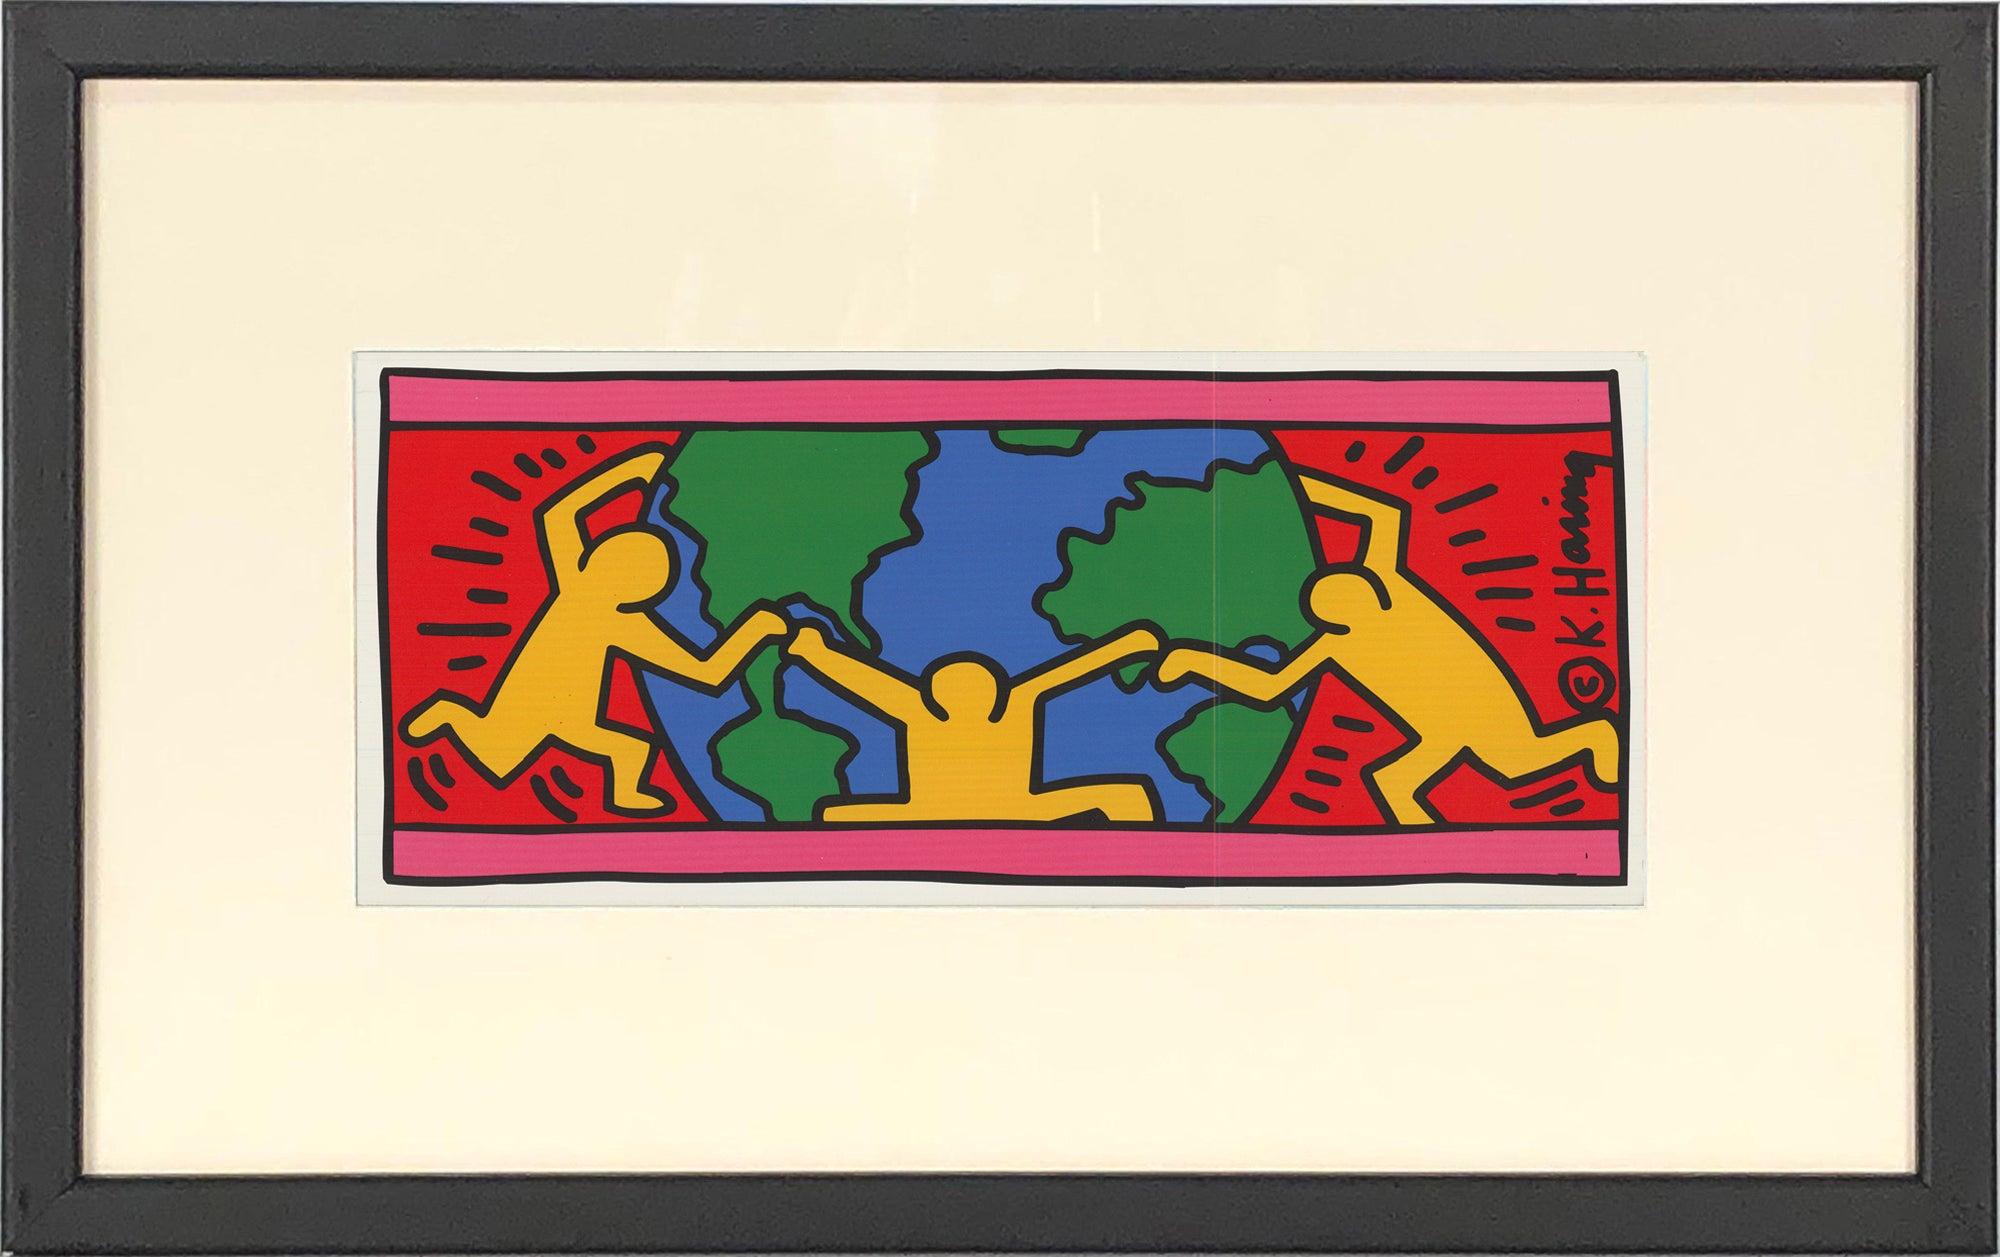 1998 Keith Haring 'World' Pop Art  Framed - Print by (after) Keith Haring